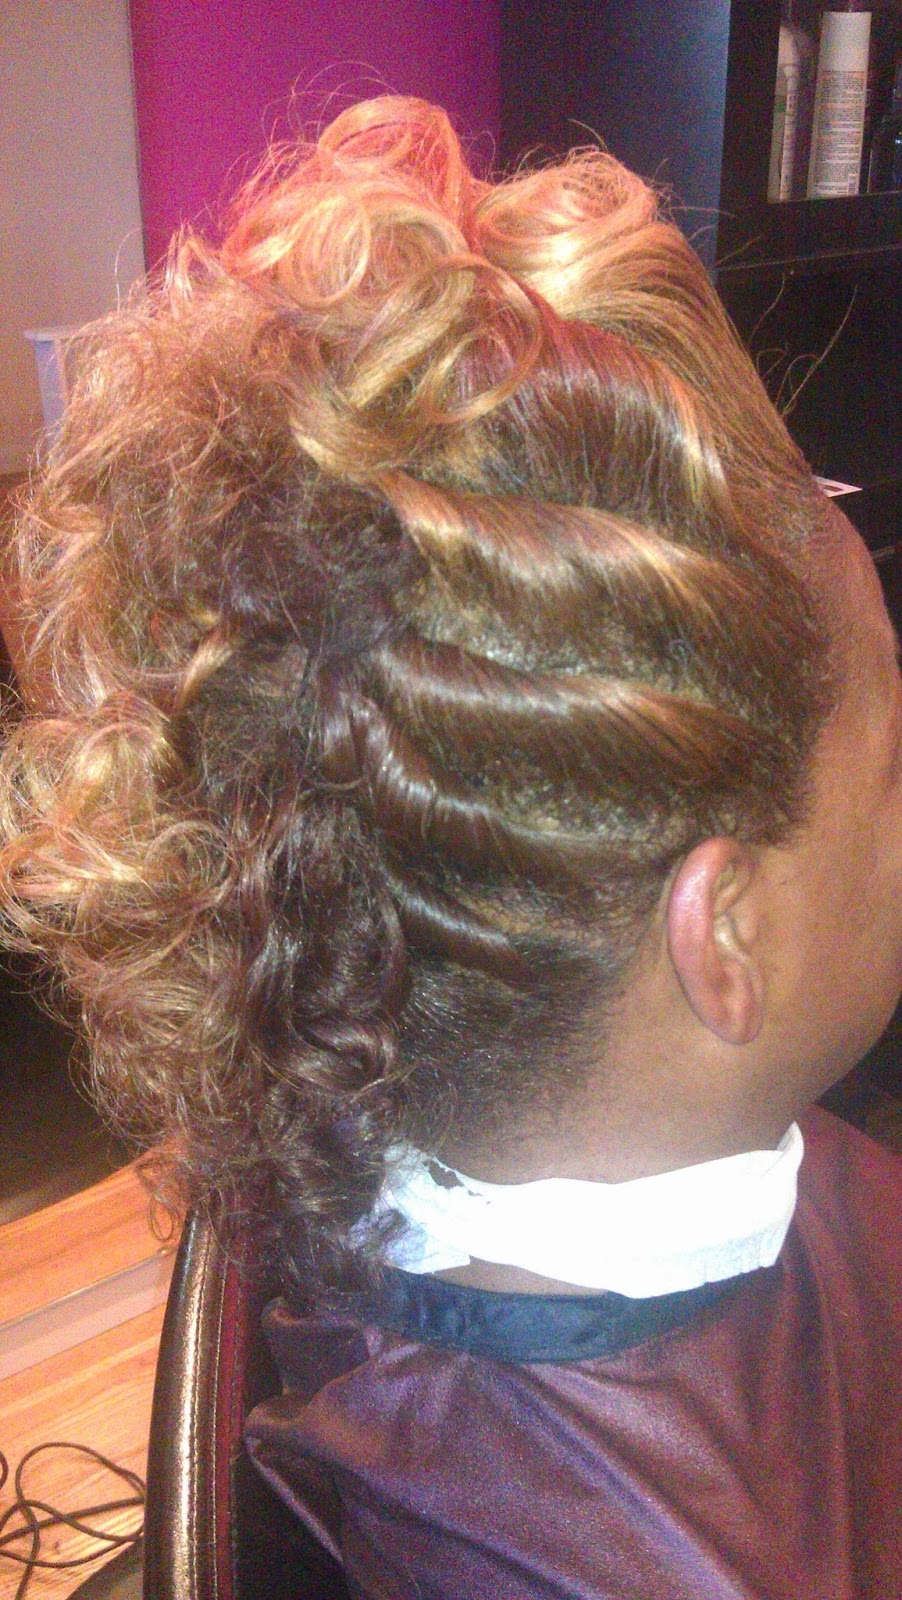 Statements Hair Boutique | 5 Chartley Park Rd #5, Reisterstown, MD 21136, USA | Phone: (410) 526-7400